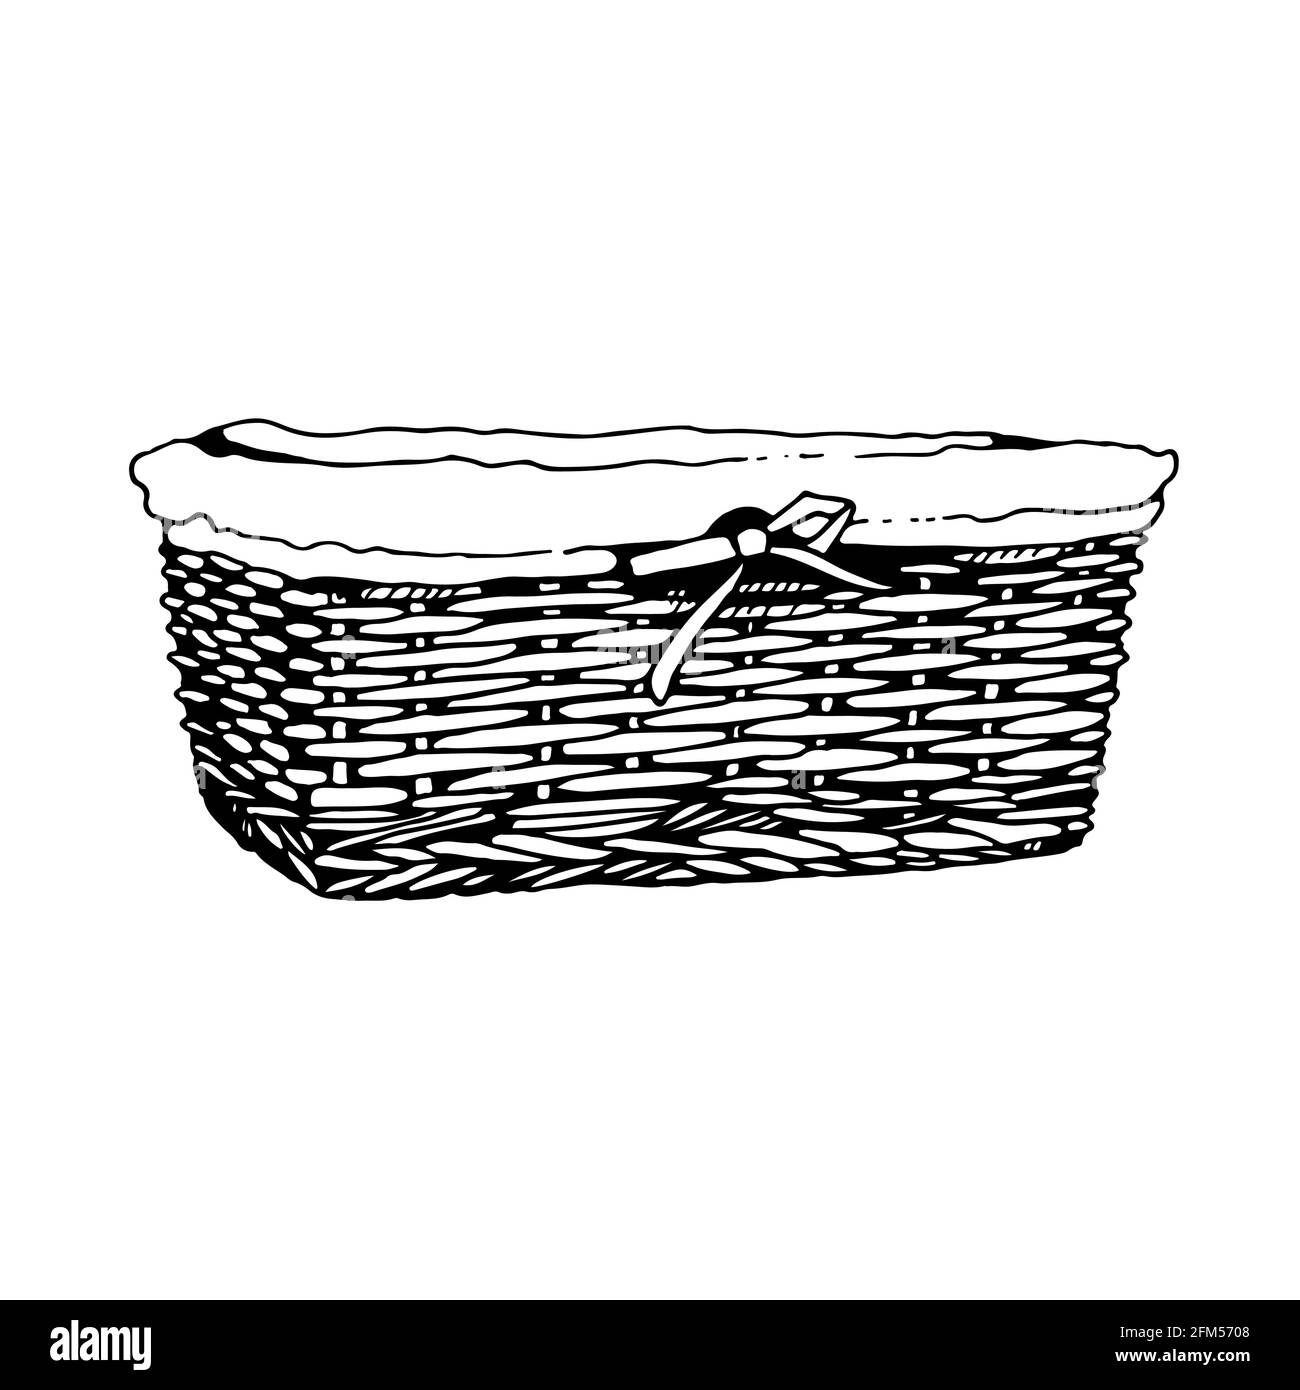 Wicker basket vector sketch, hand drawn square basket isolated on white background Stock Vector